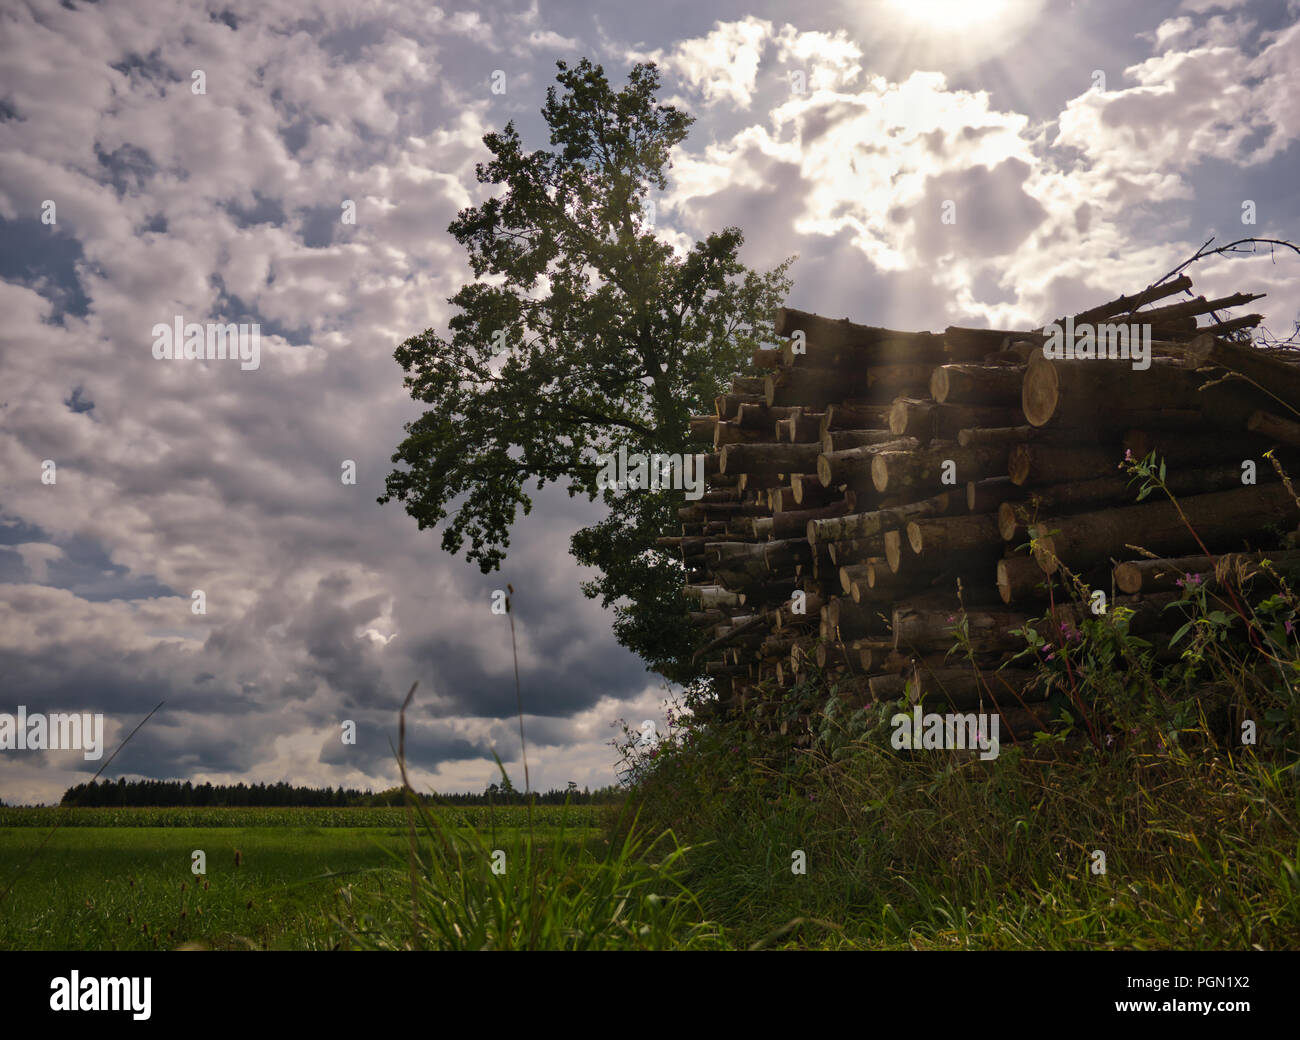 Stacked trees at a meadow with sunbeams and gray clouds Stock Photo